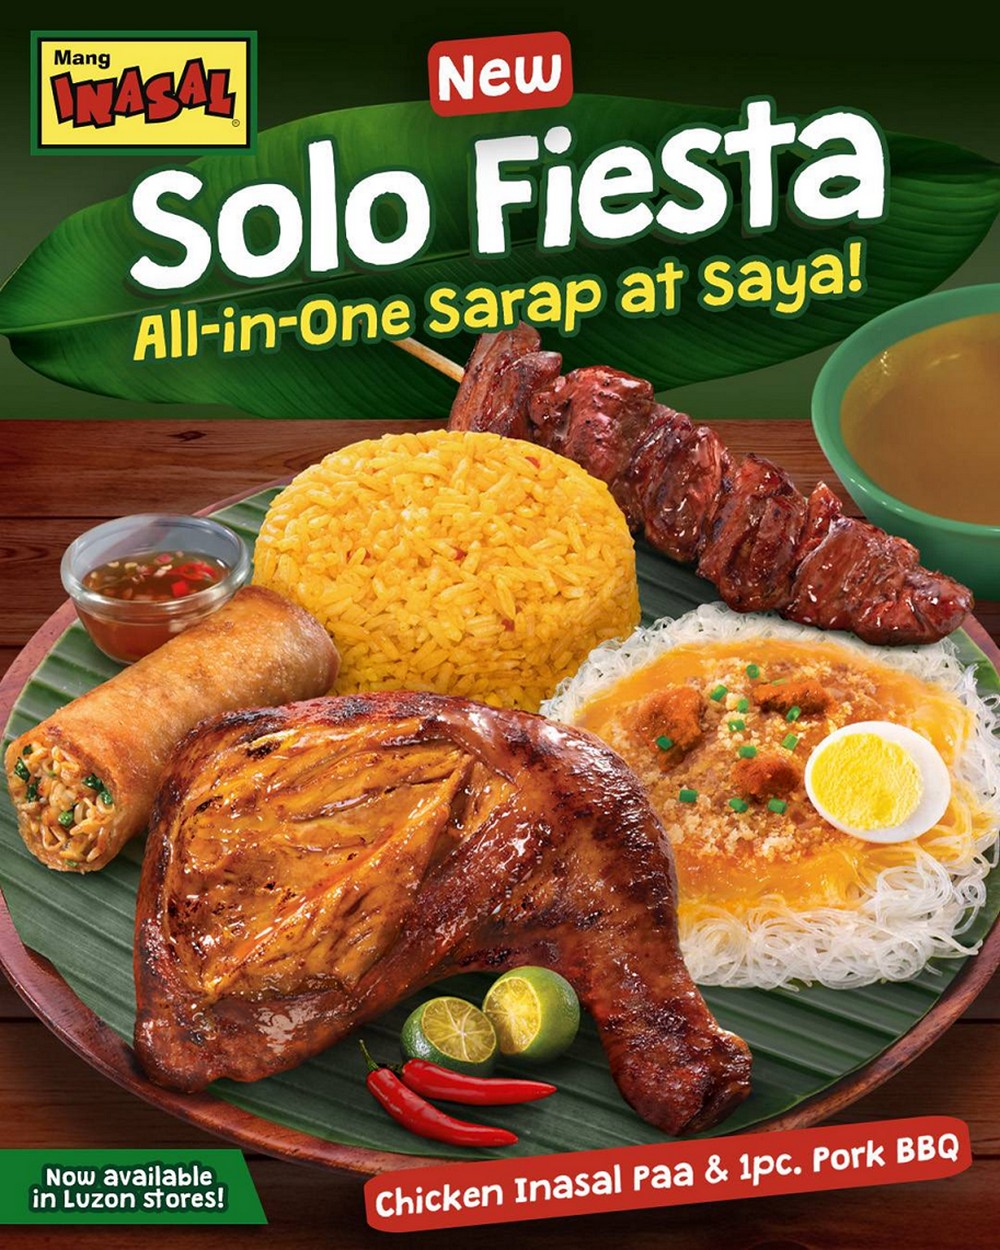 Mang Inasal launches Solo Fiesta in Luzon stores